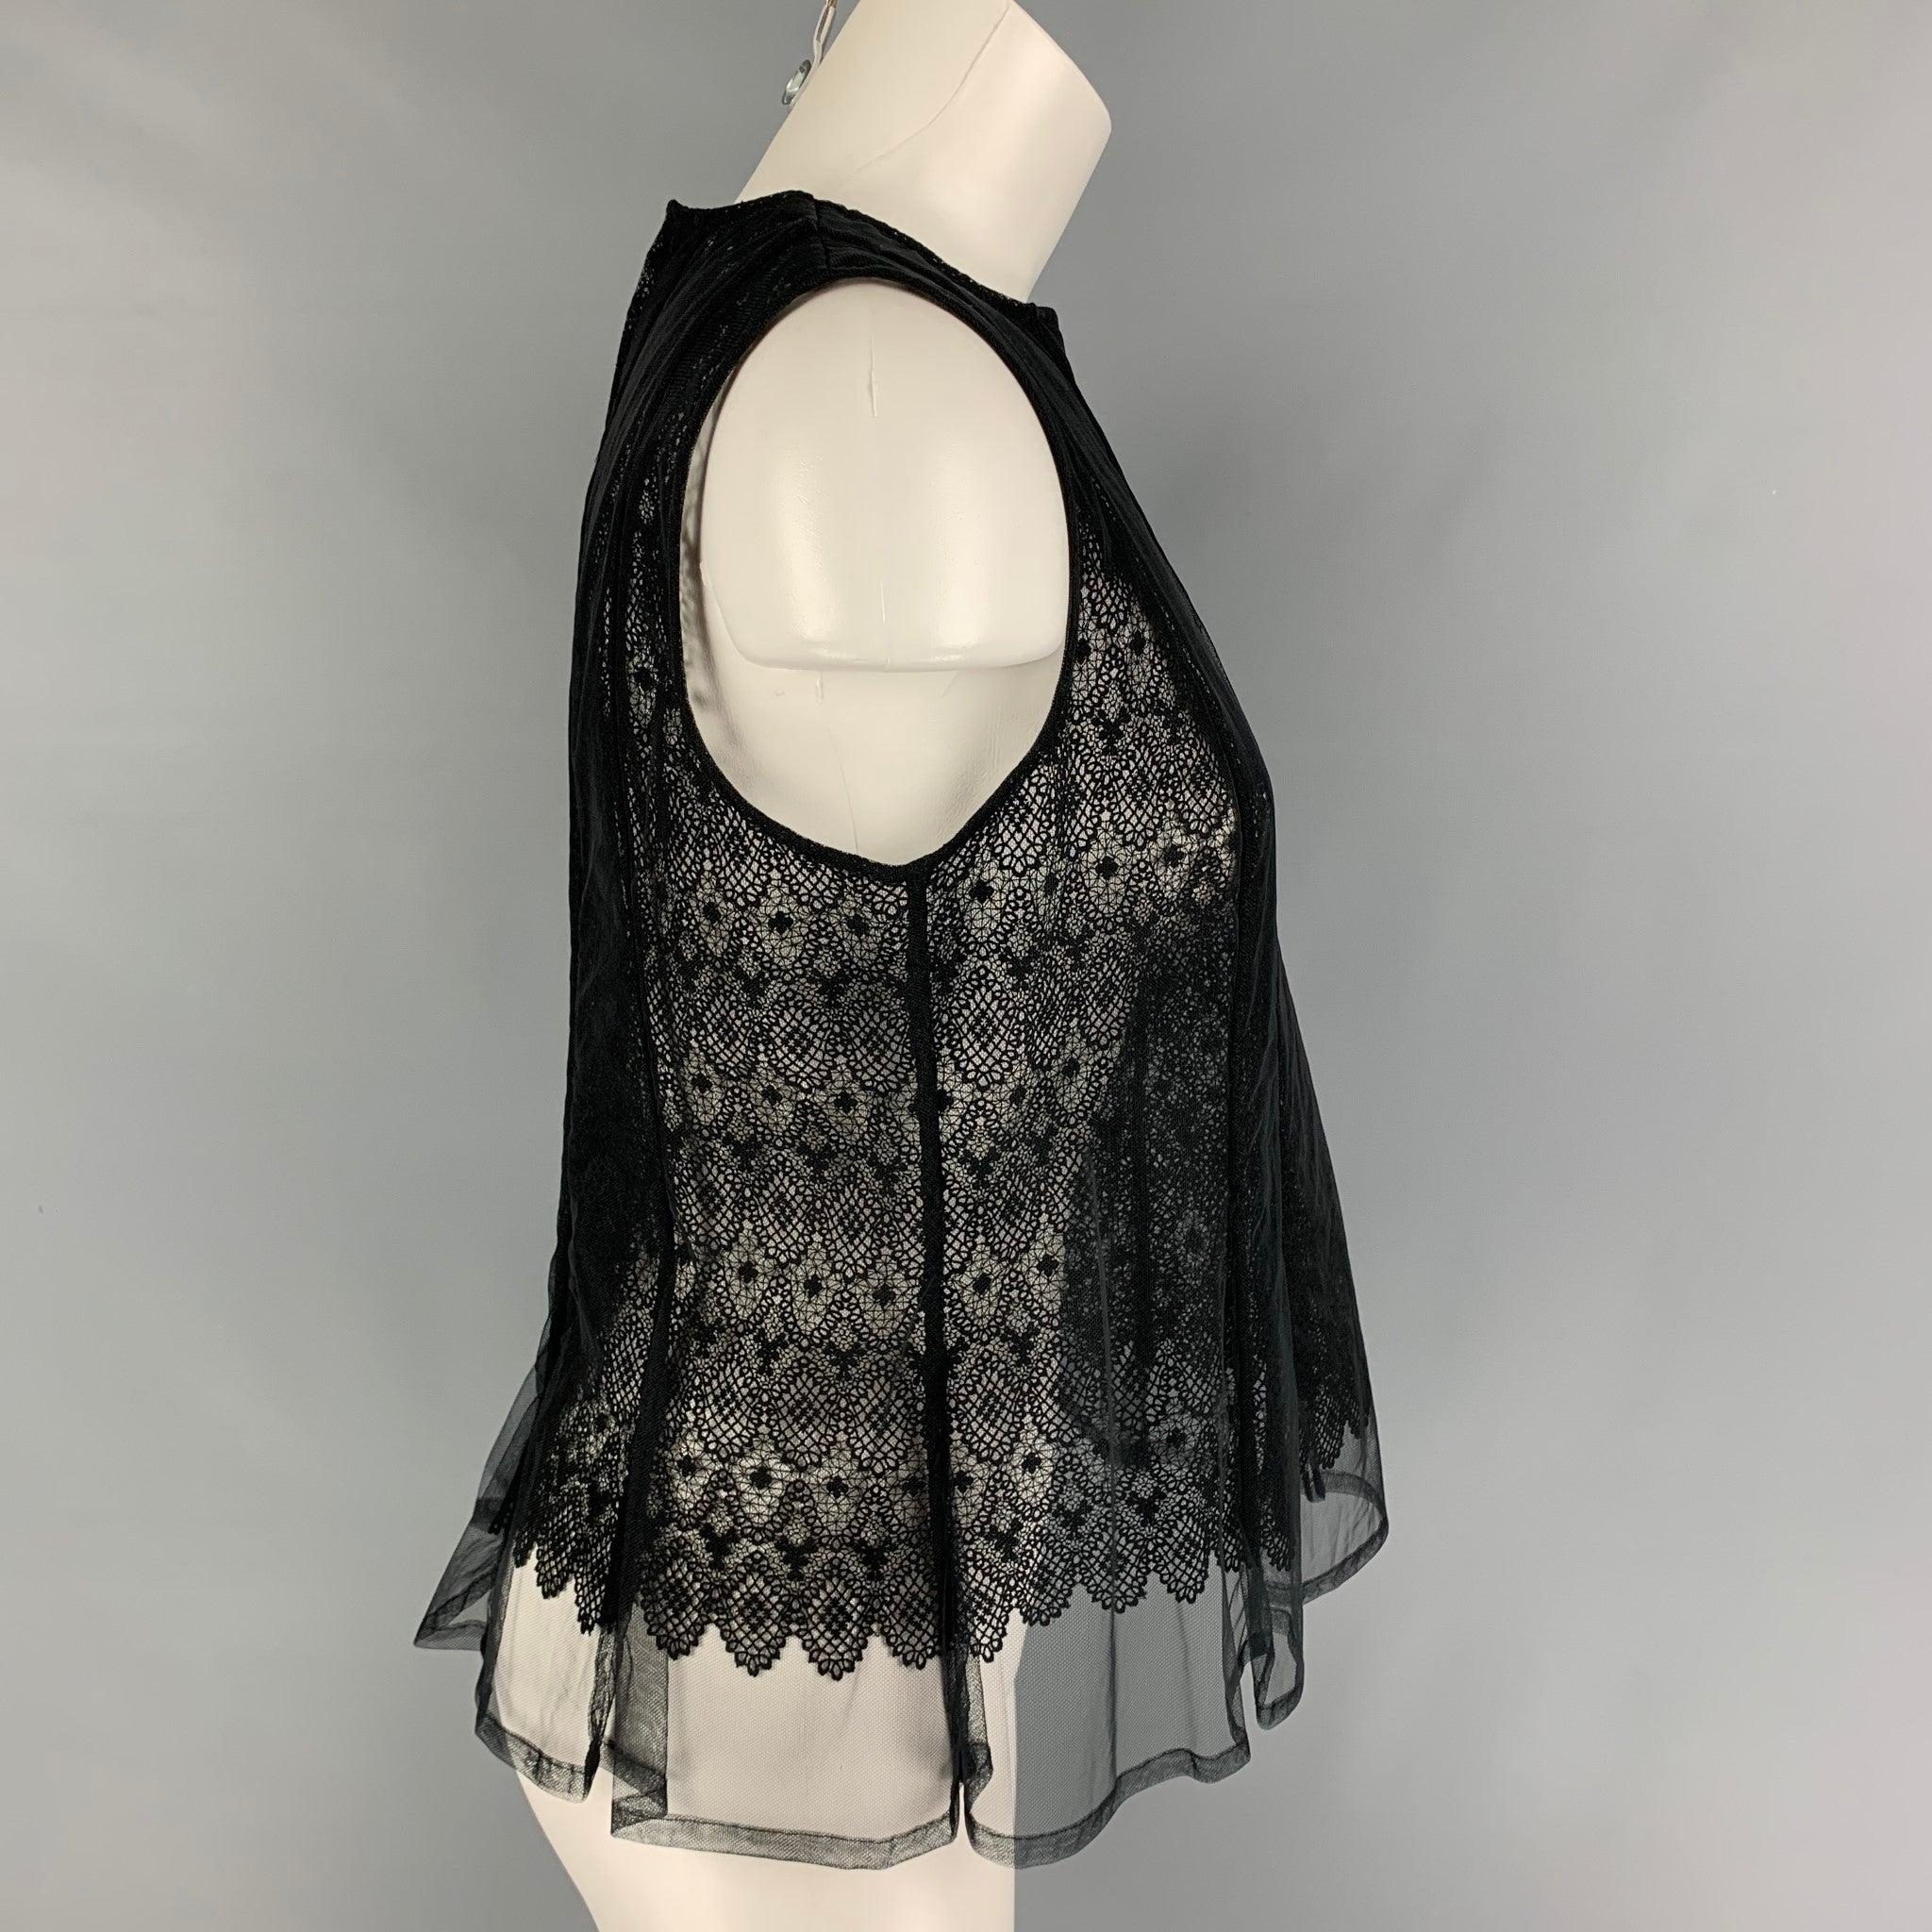 NOIR KEI NINOMIYA top comes in a black lace tulle material featuring a overlay design, sleeveless, and a back zip up closure.
Excellent Pre-Owned Condition.  

Marked:   M  

Measurements: 
 
Shoulder: 14 inches Bust: 32 inches Length: 22 inches 
 